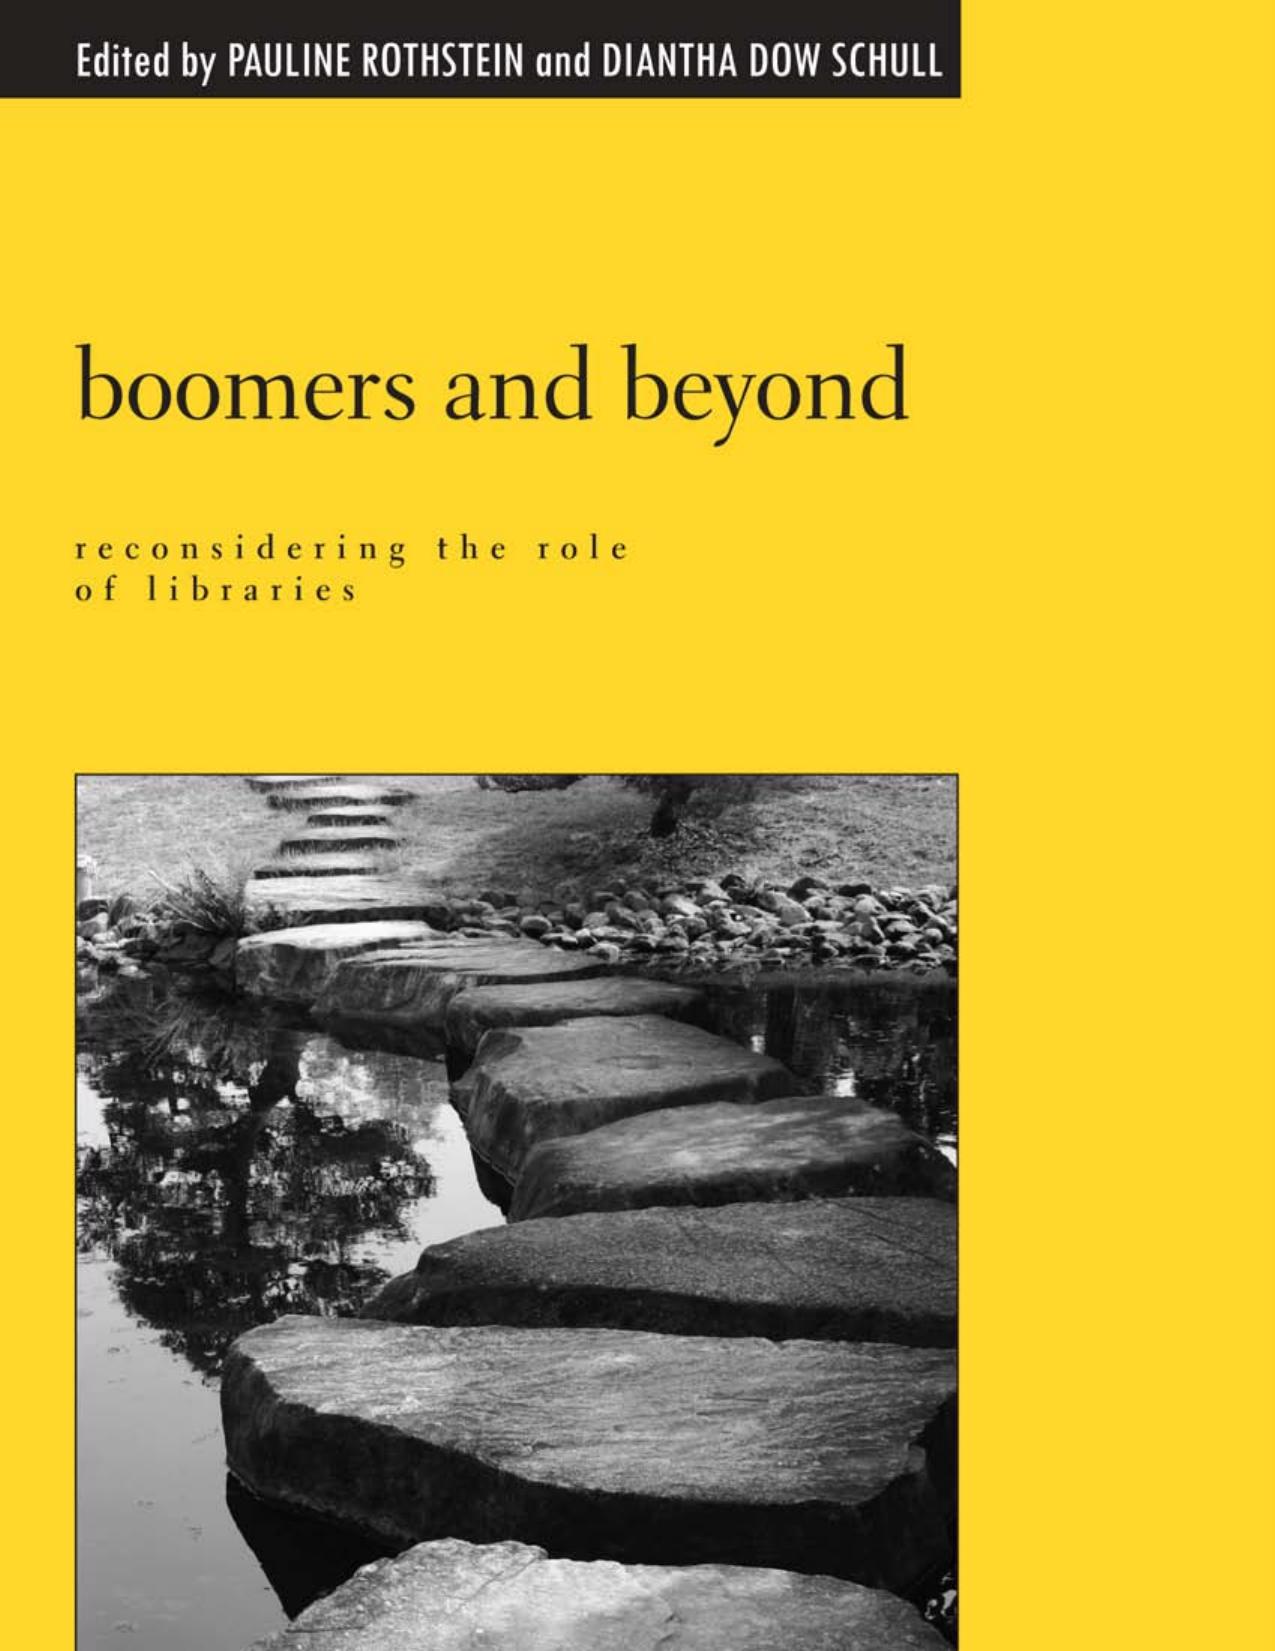 Boomers and Beyond : Reconsidering the Role of Libraries by Pauline Rothstein; Diantha Dow Schull